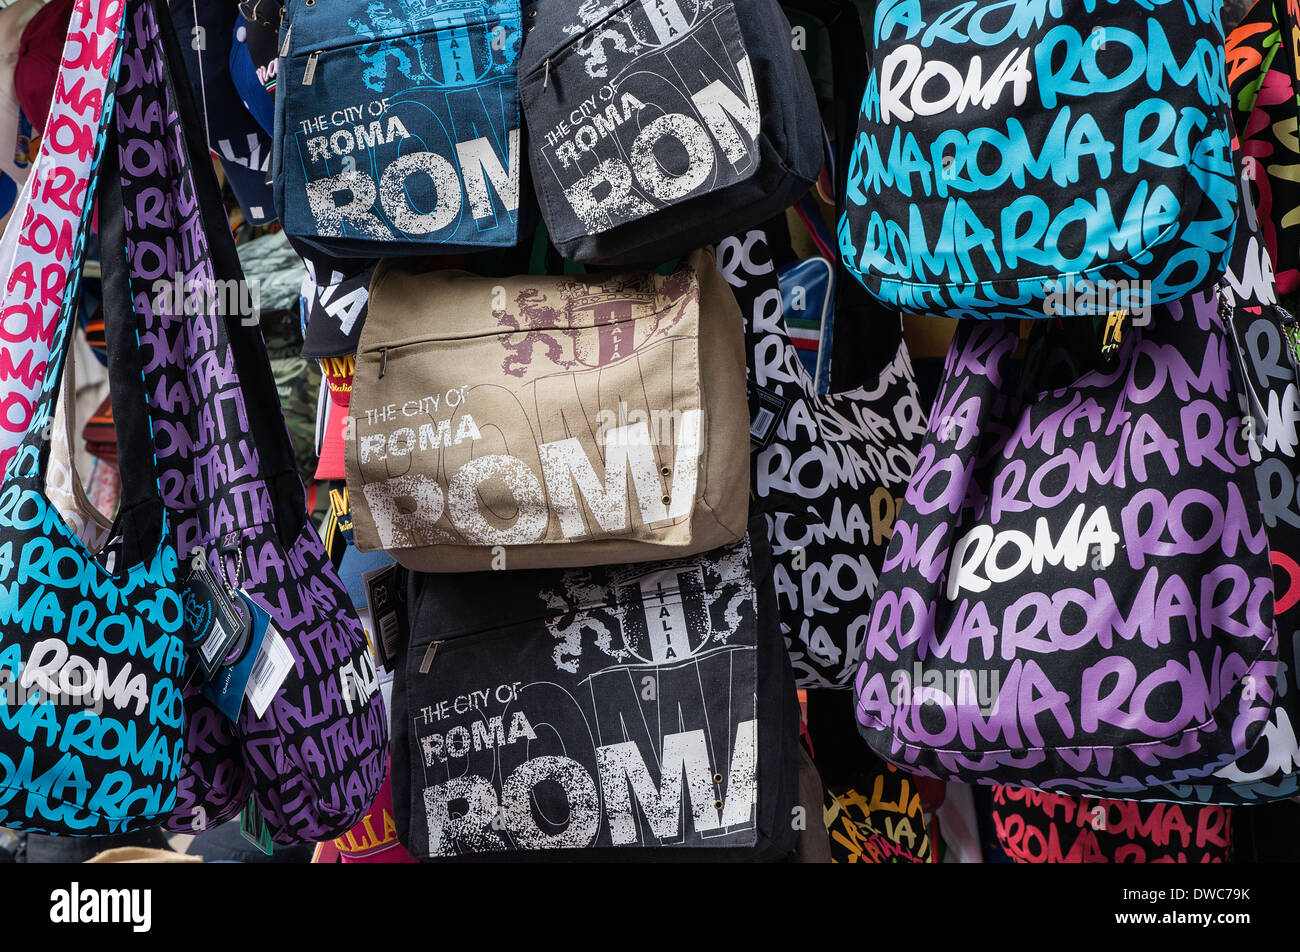 Roma bags for sale in local shop, Rome, Italy Stock Photo